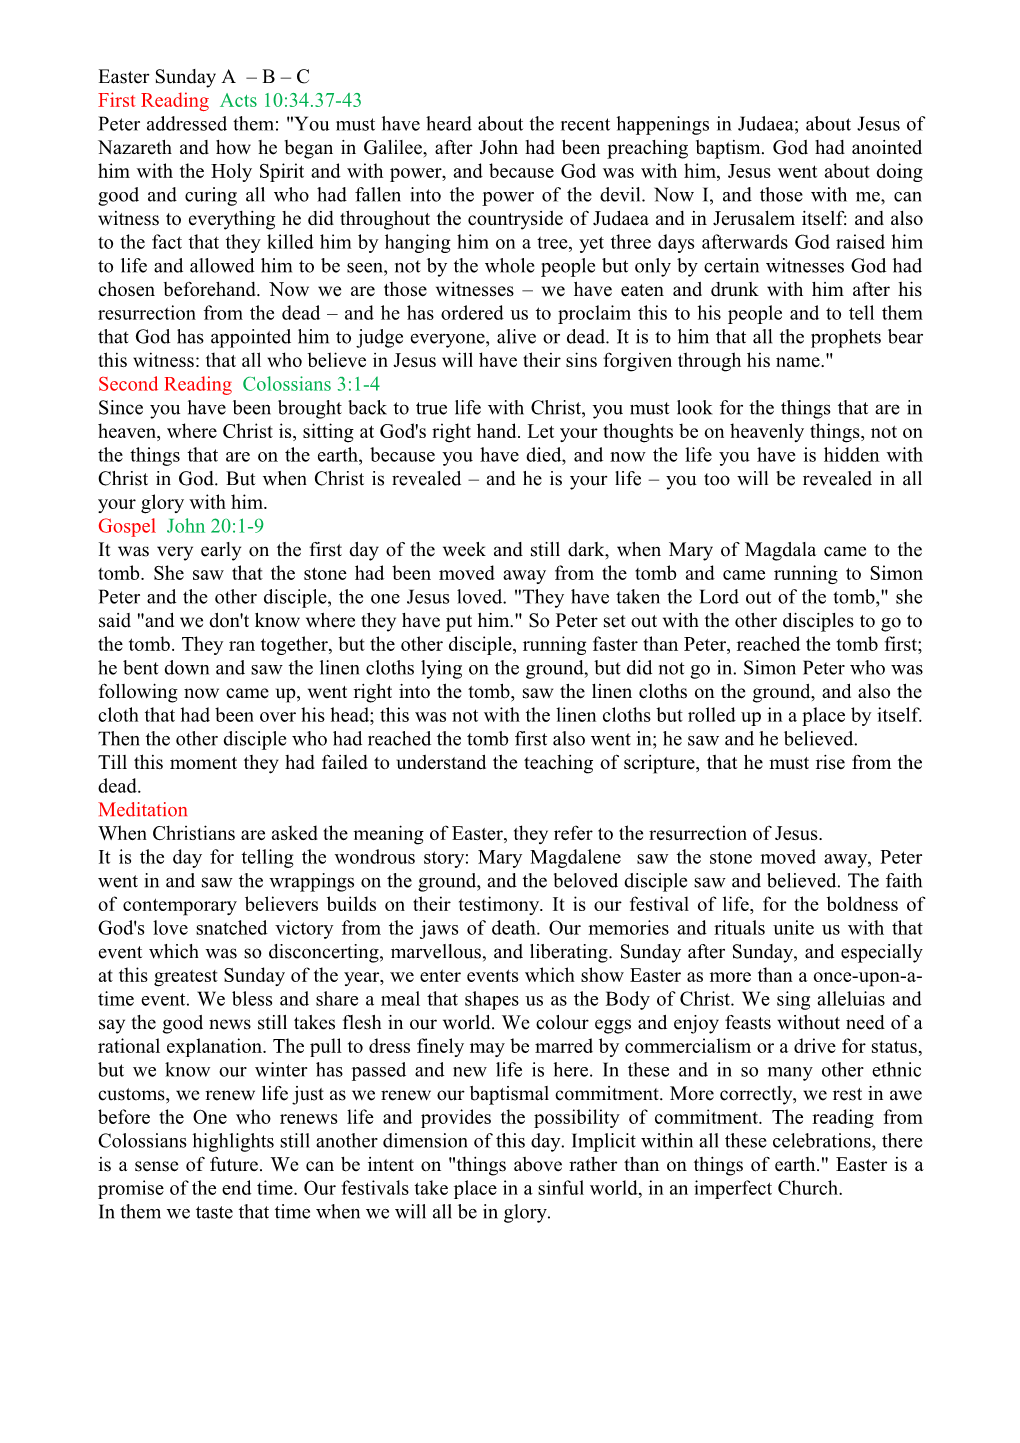 First Reading Acts 10:34.37-43 s1